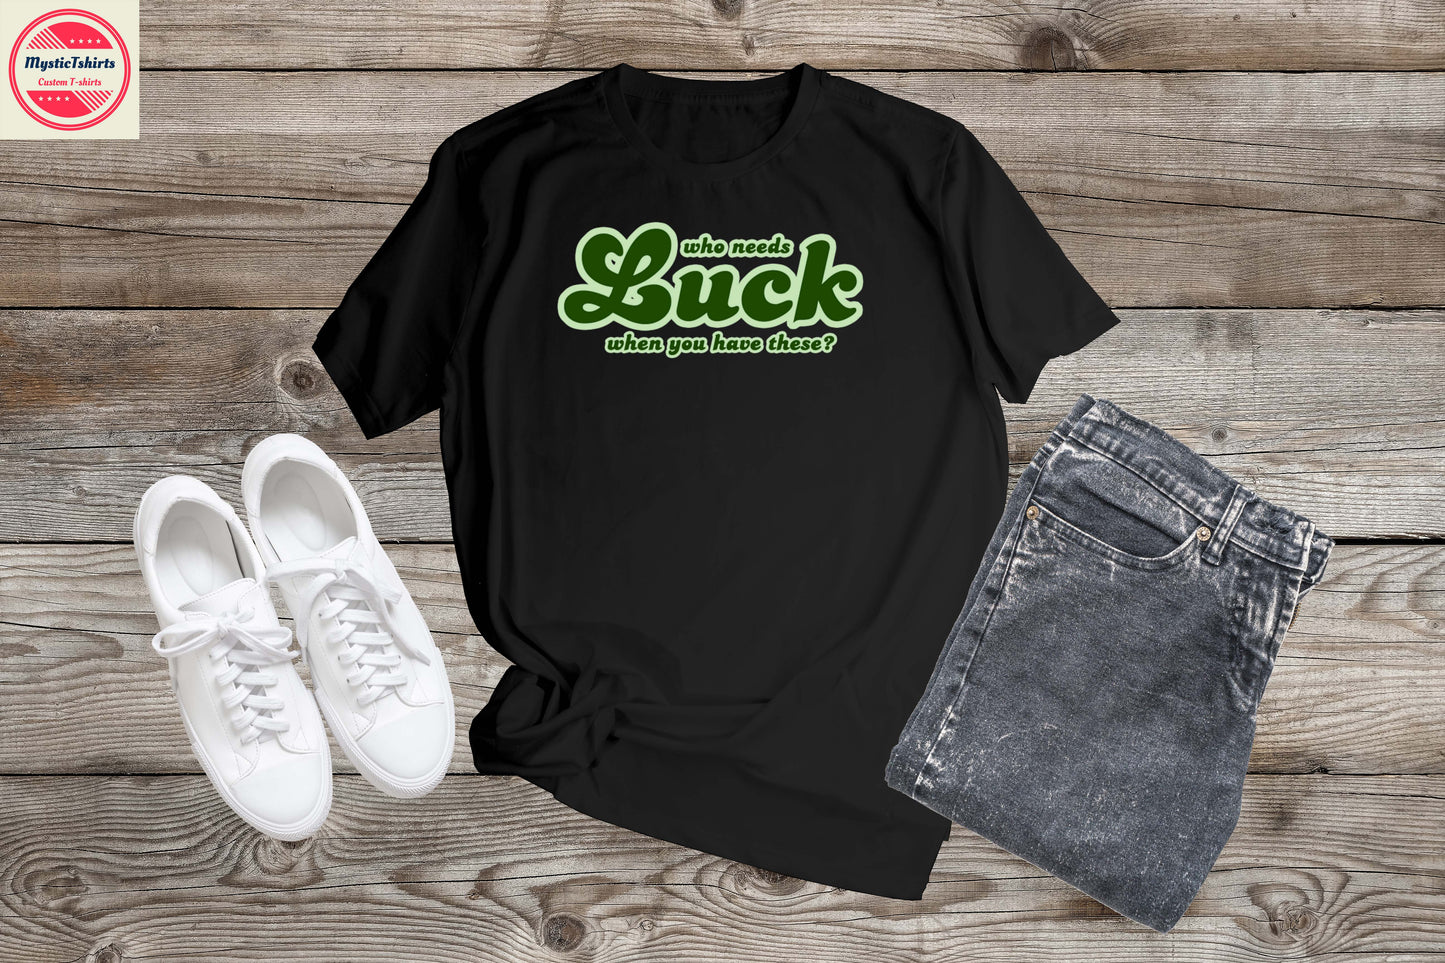 475. WHO NEEDS LUCK WHEN YOU HAVE THESE?, Custom Made Shirt, Personalized T-Shirt, Custom Text, Make Your Own Shirt, Custom Tee